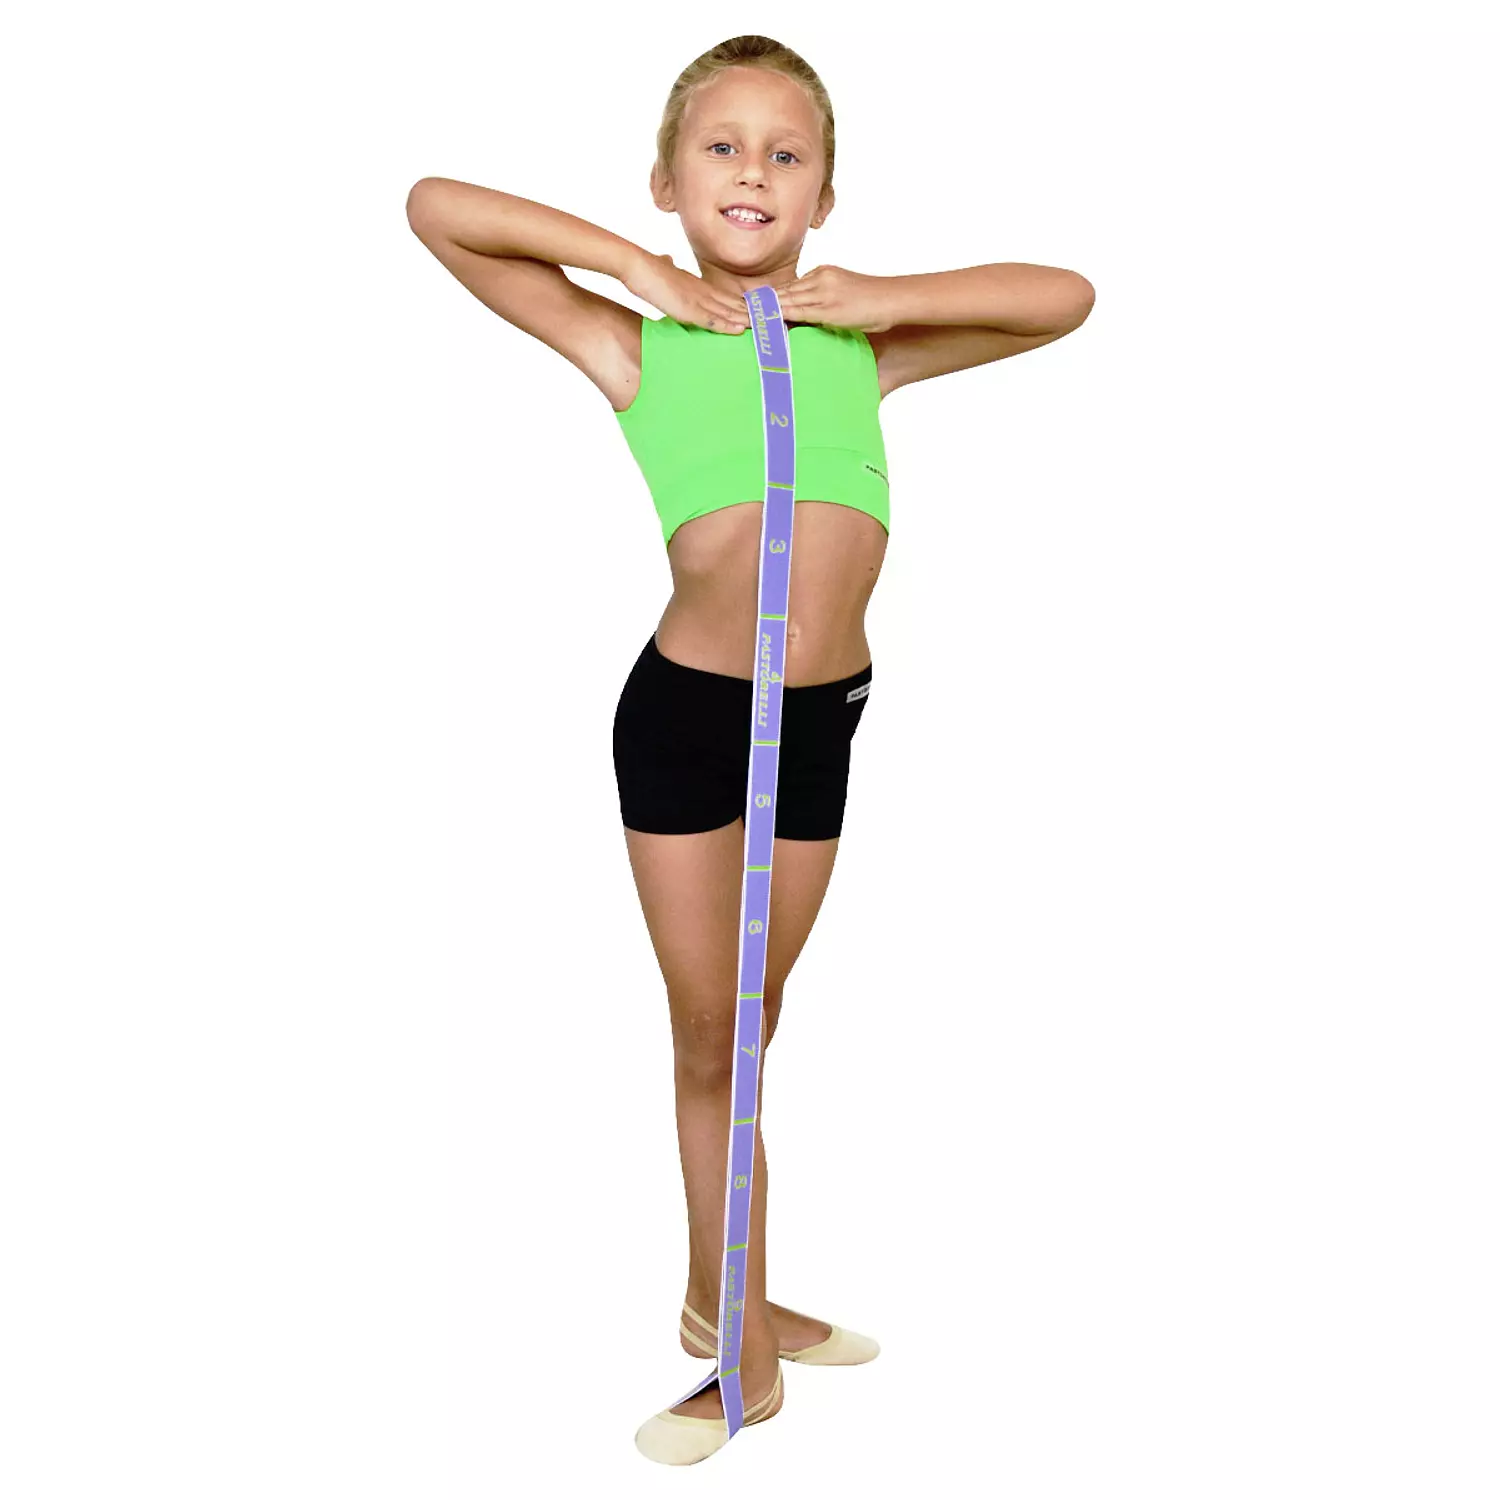 Pastorelli-Resistance band for strengthening exercise 4